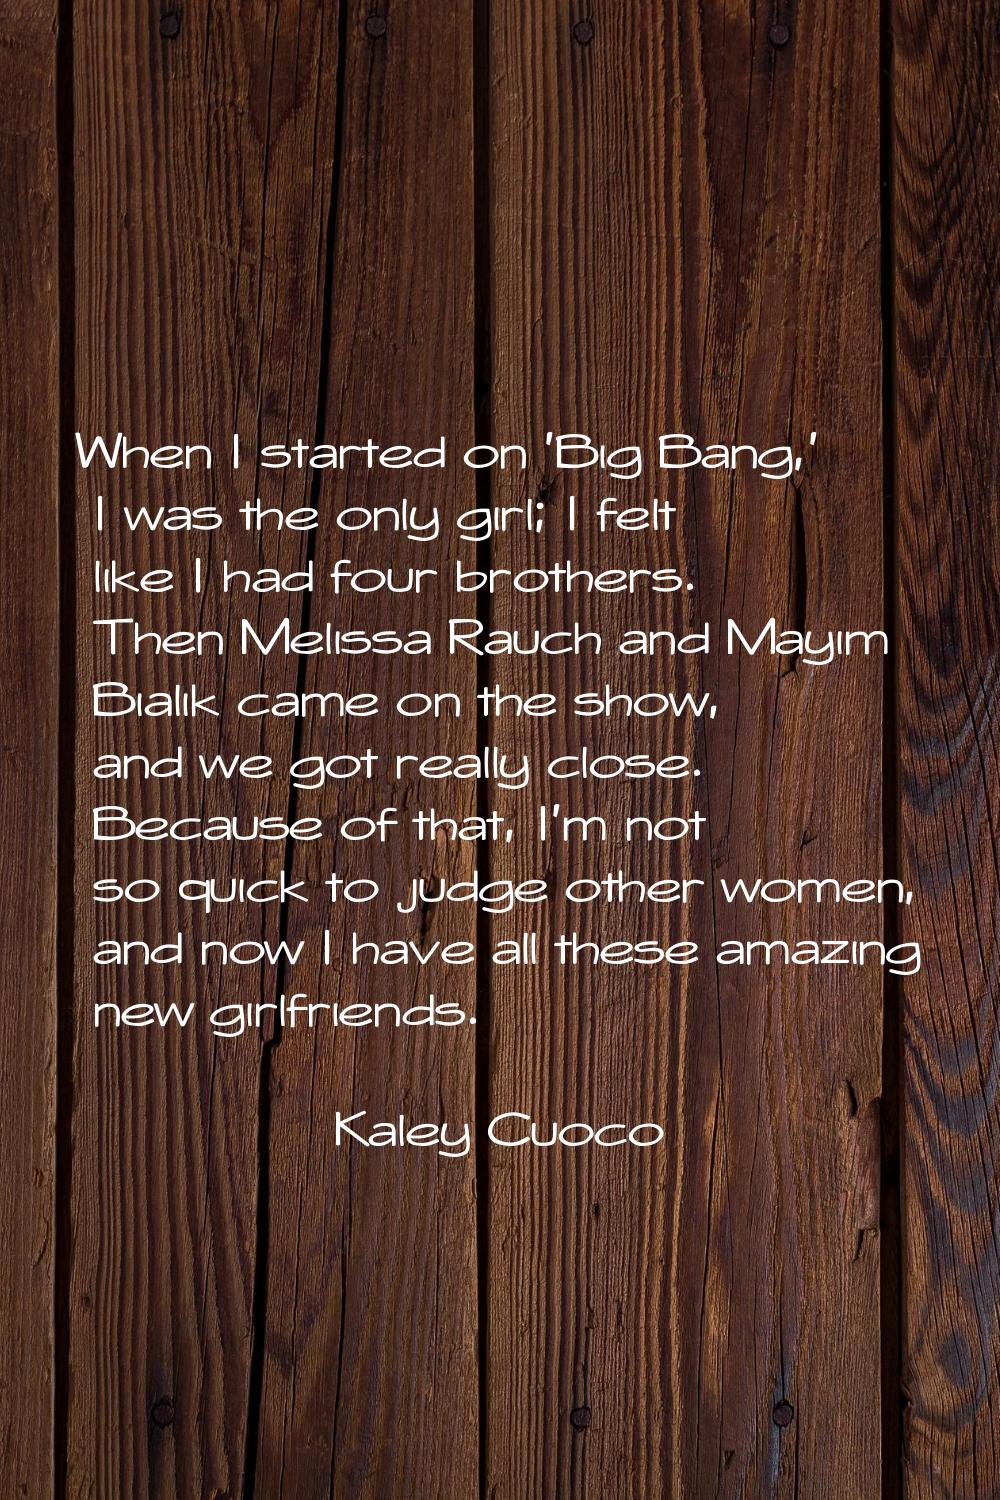 When I started on 'Big Bang,' I was the only girl; I felt like I had four brothers. Then Melissa Ra